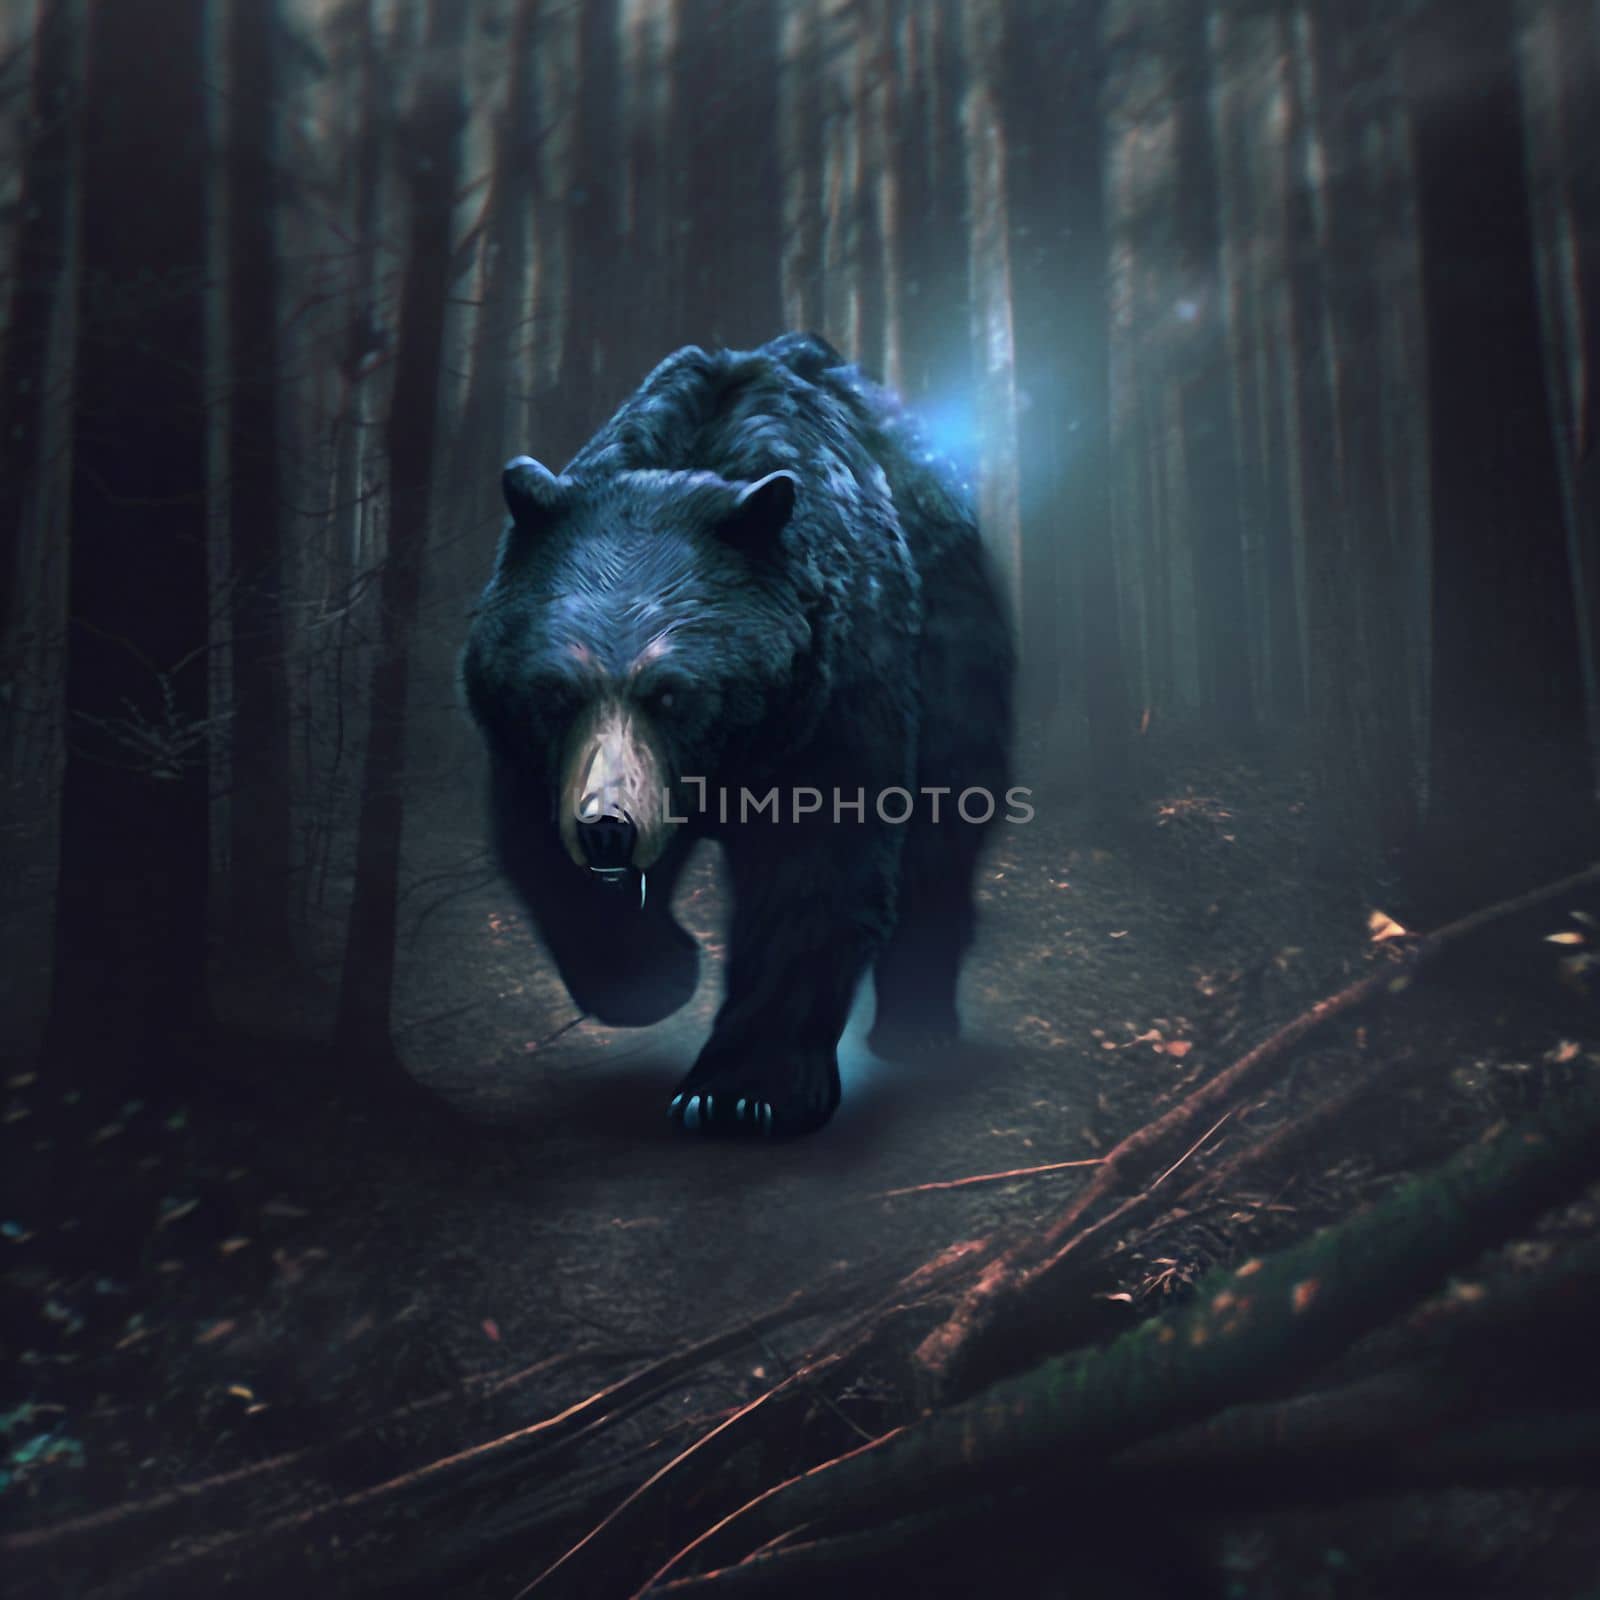 Bear in the forest. High quality illustration